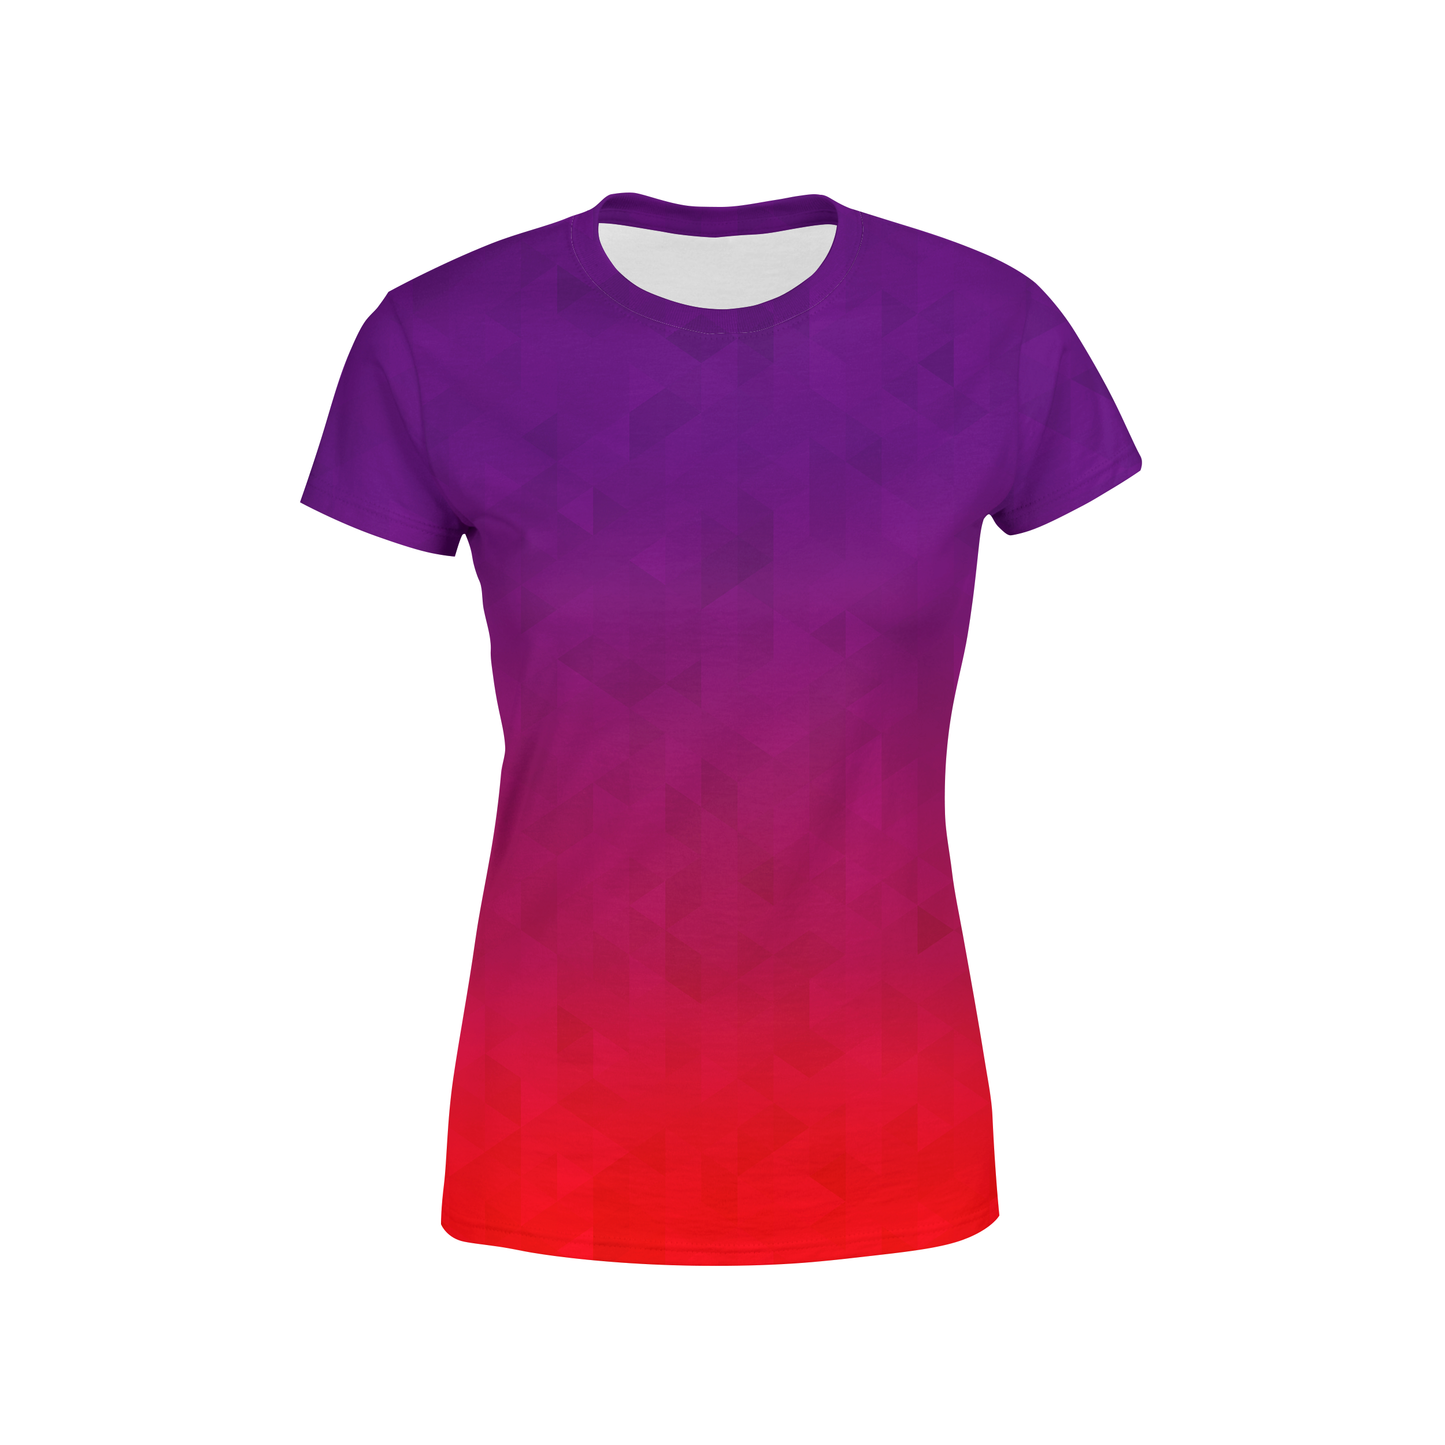 Women's Stained Triangles T-Shirt